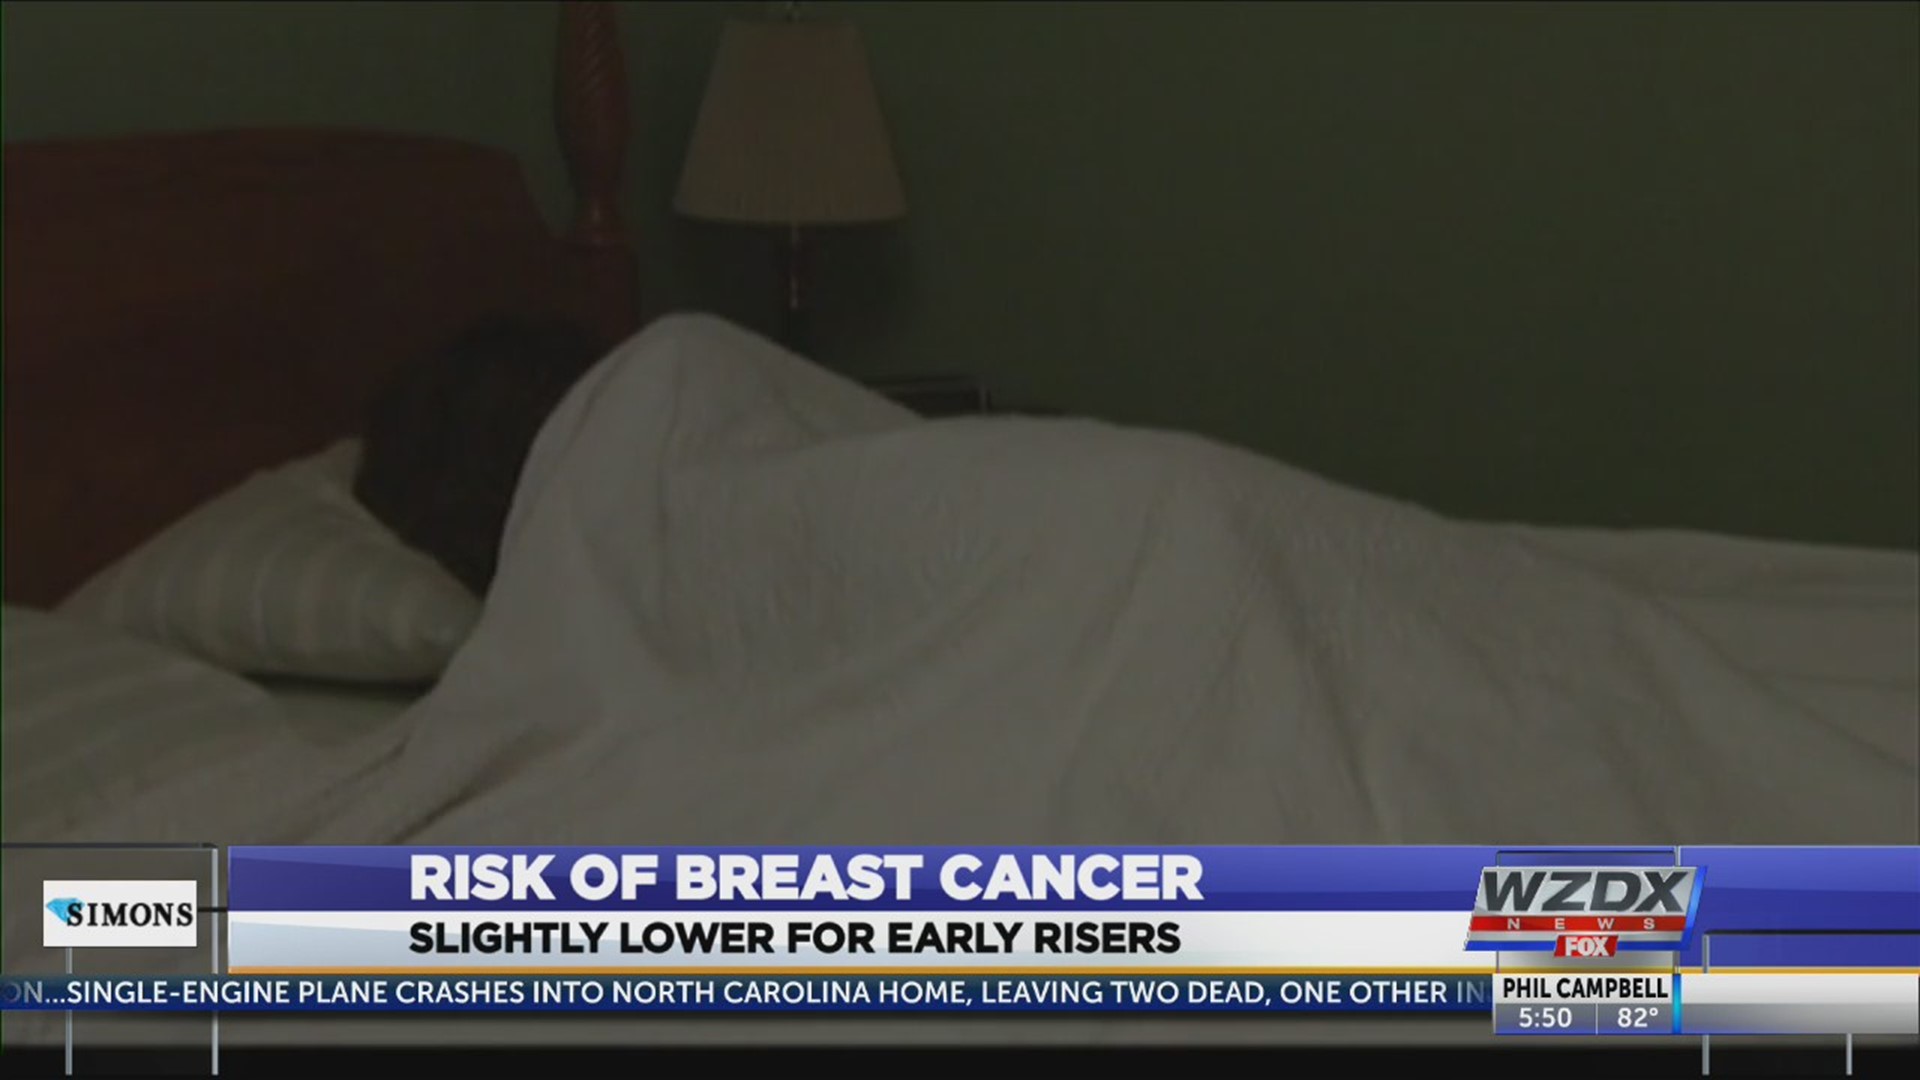 New research shows women who get up early have a slightly reduced risk of developing breast cancer.